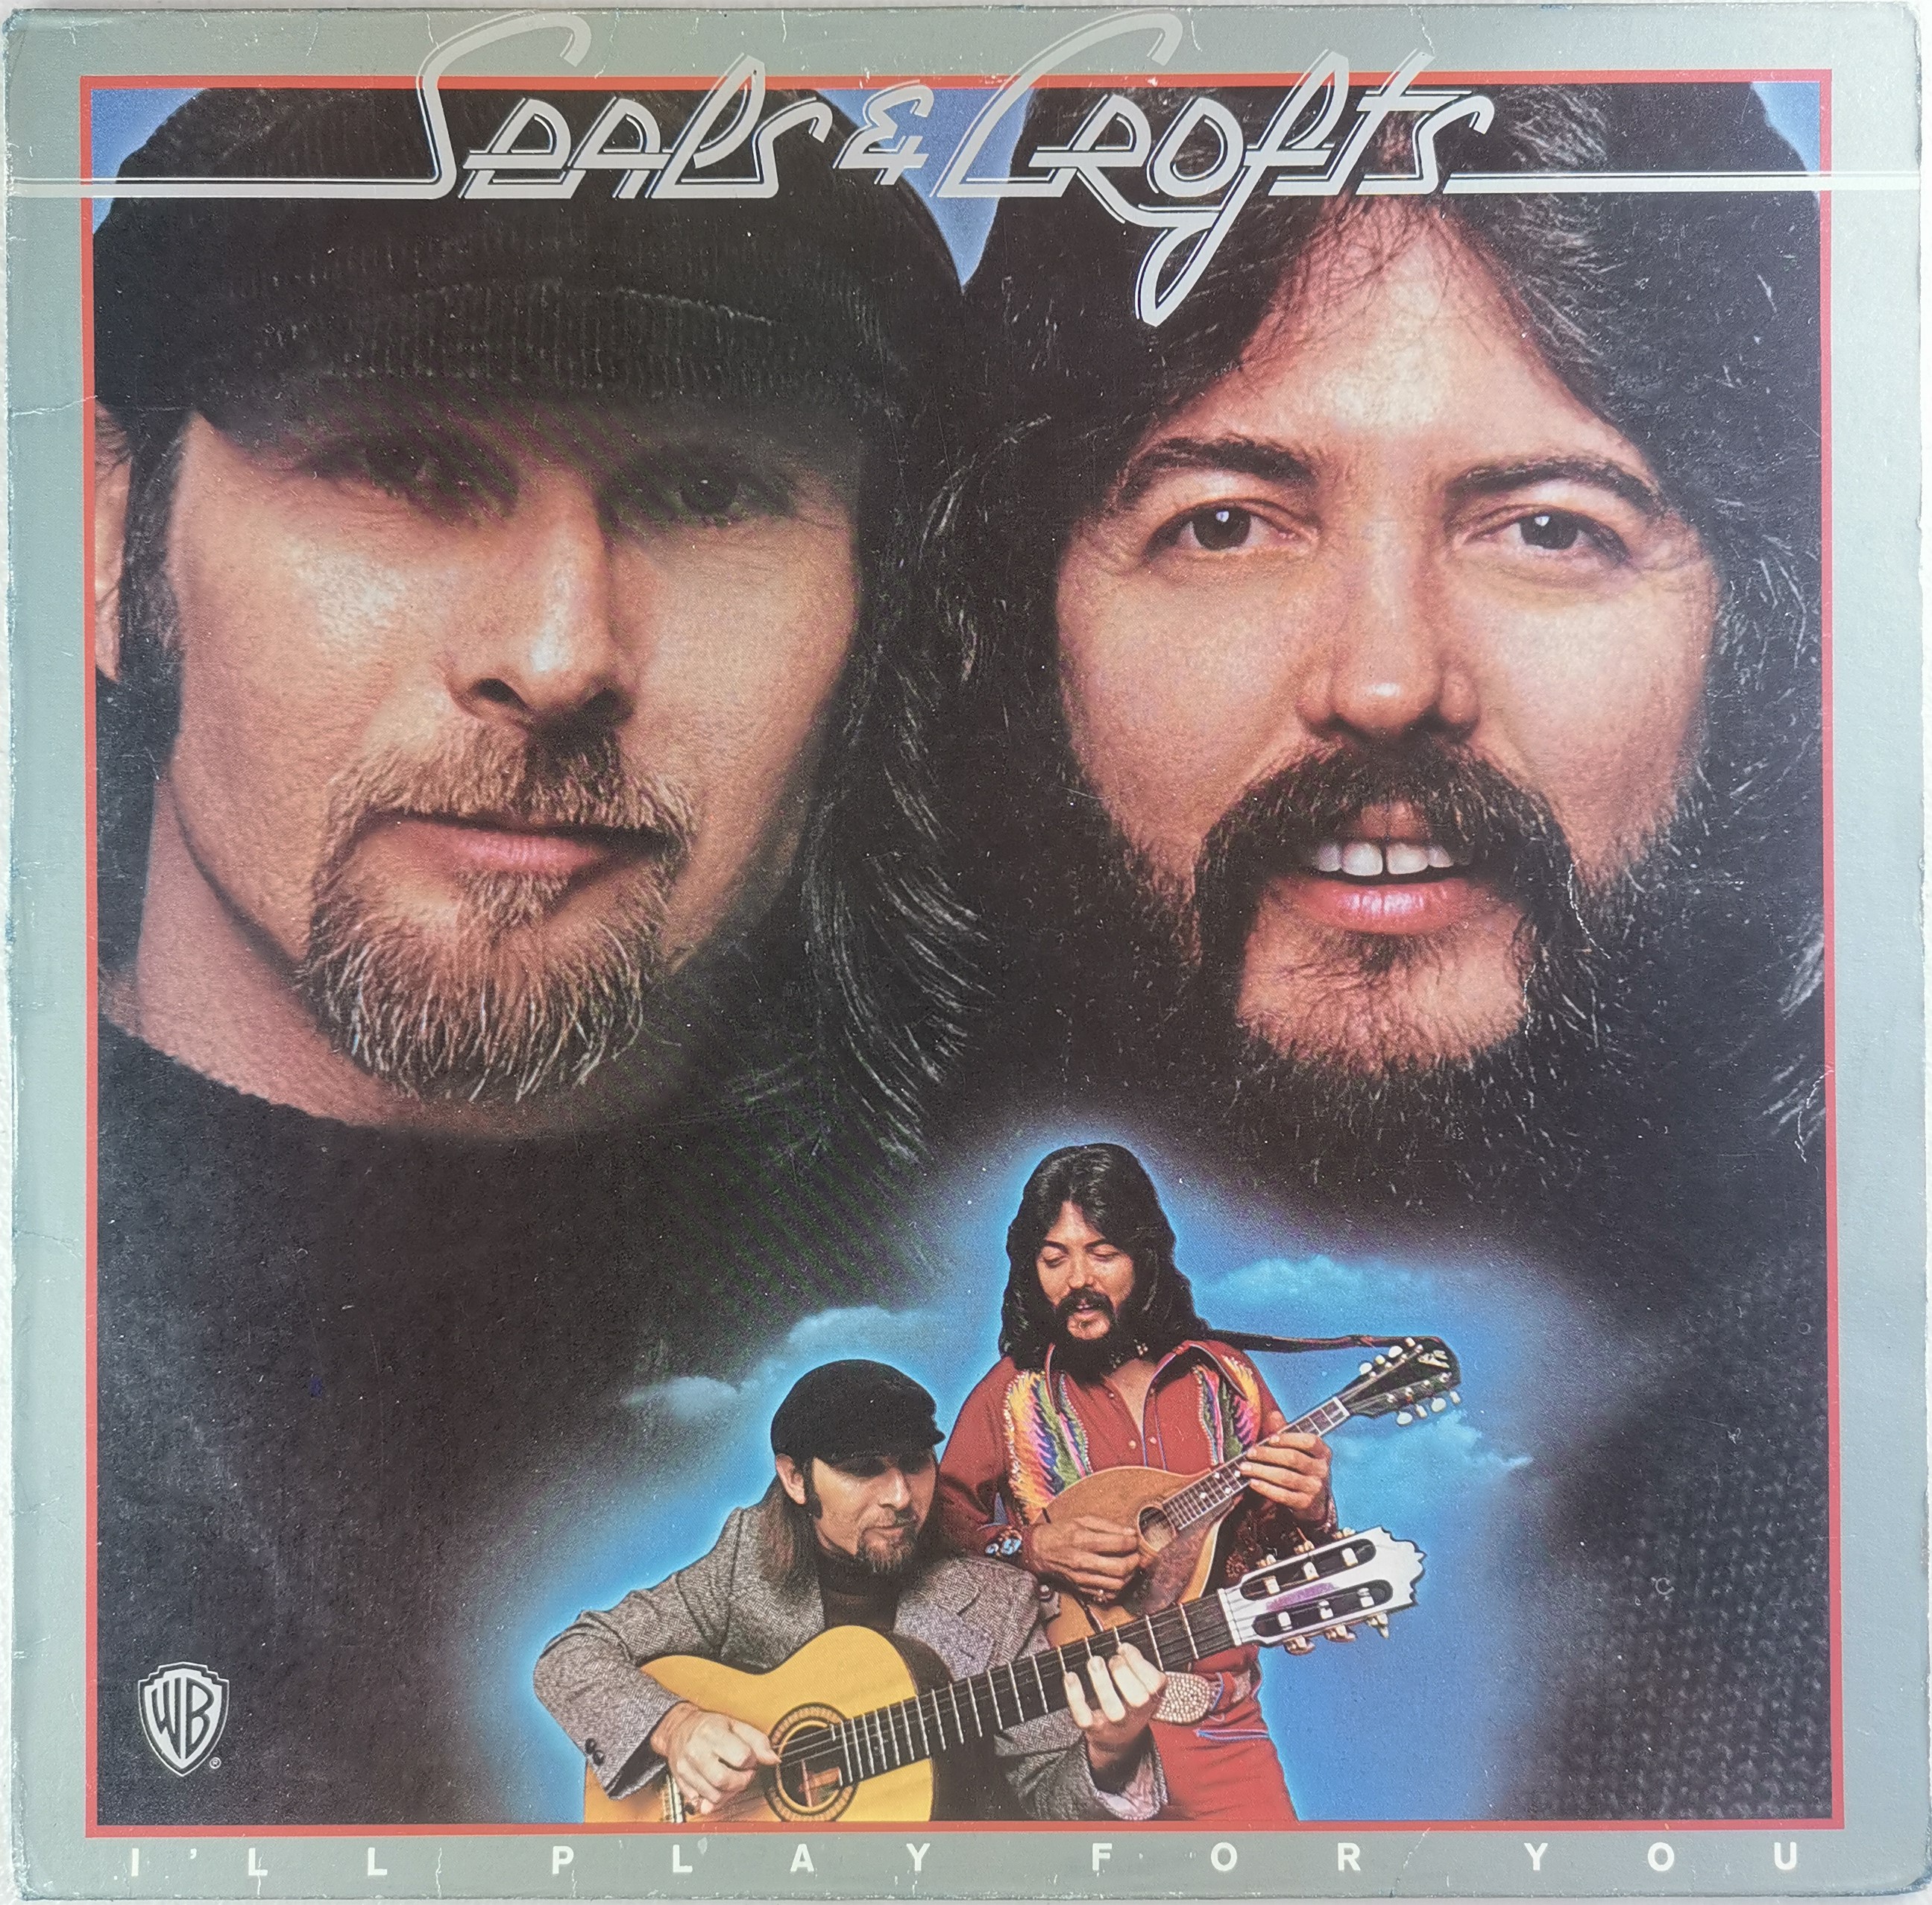 I Ll Play For You By Seals Crofts Vinyl Record Lazada Ph